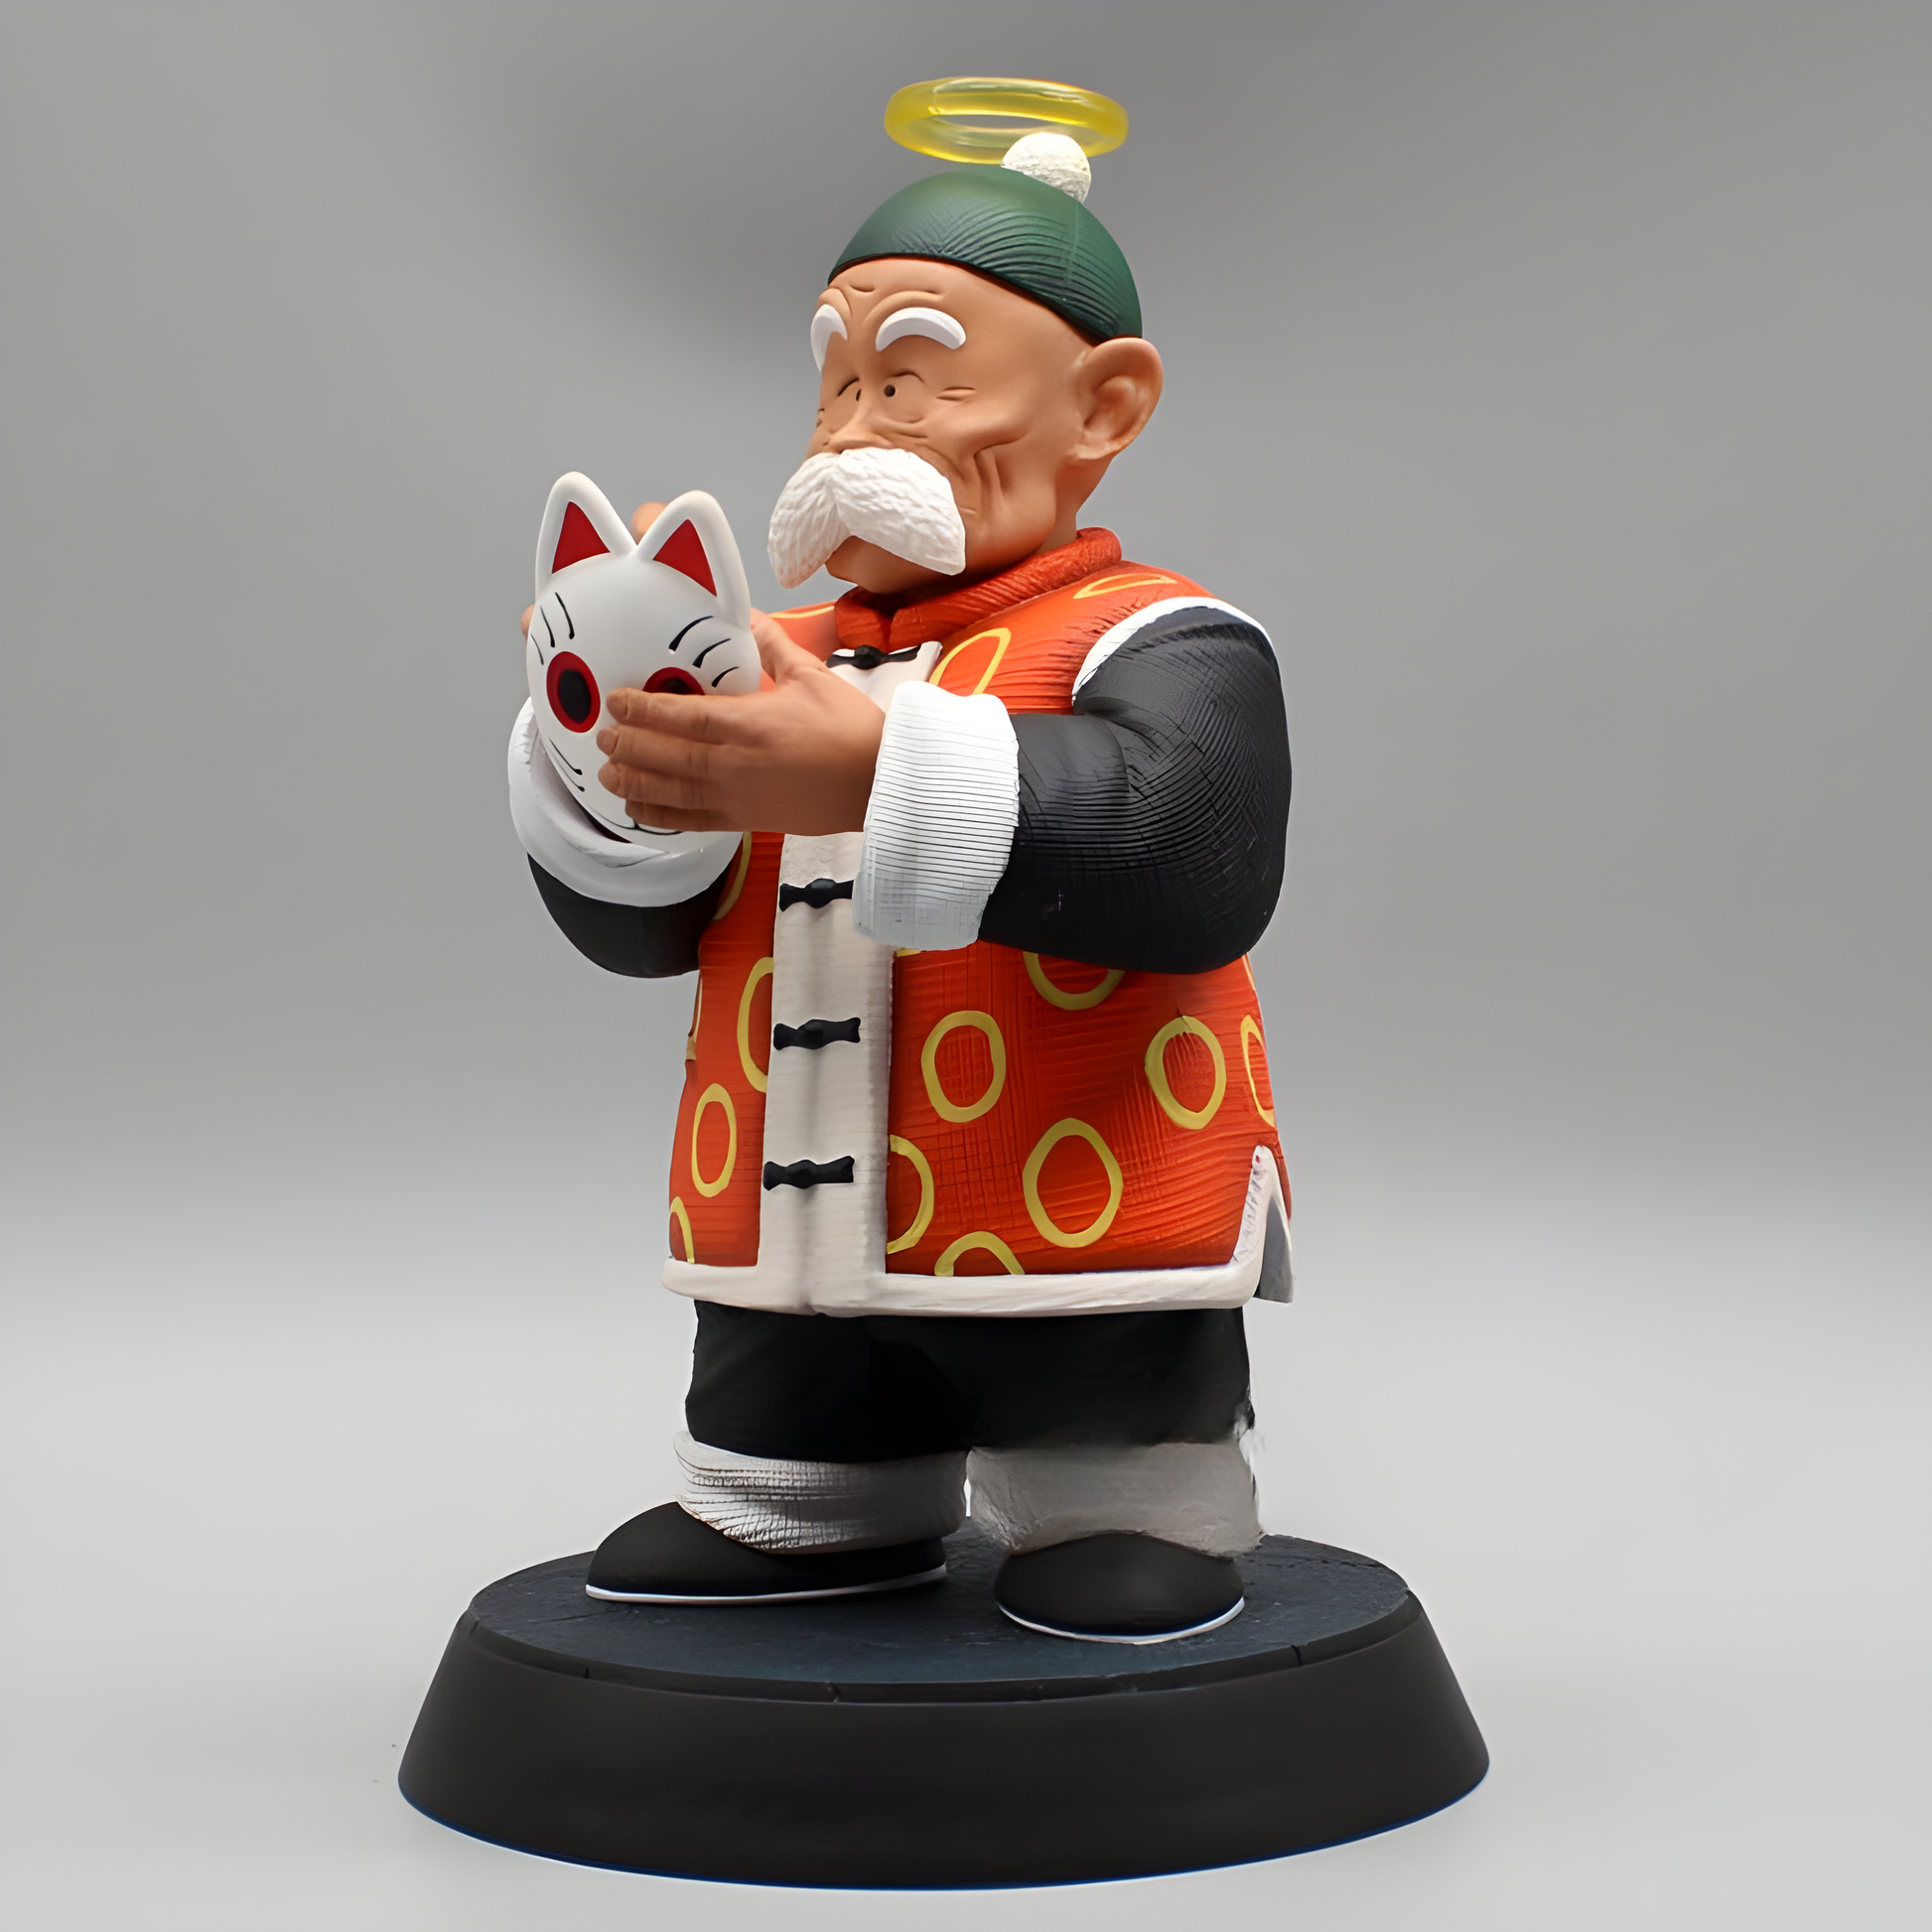 Detailed Dragon Ball figure of Master Roshi with a halo, clutching a white maneki-neko charm, a unique addition to any Dragon Ball collectibles assortment, presented on a solid grey platform.